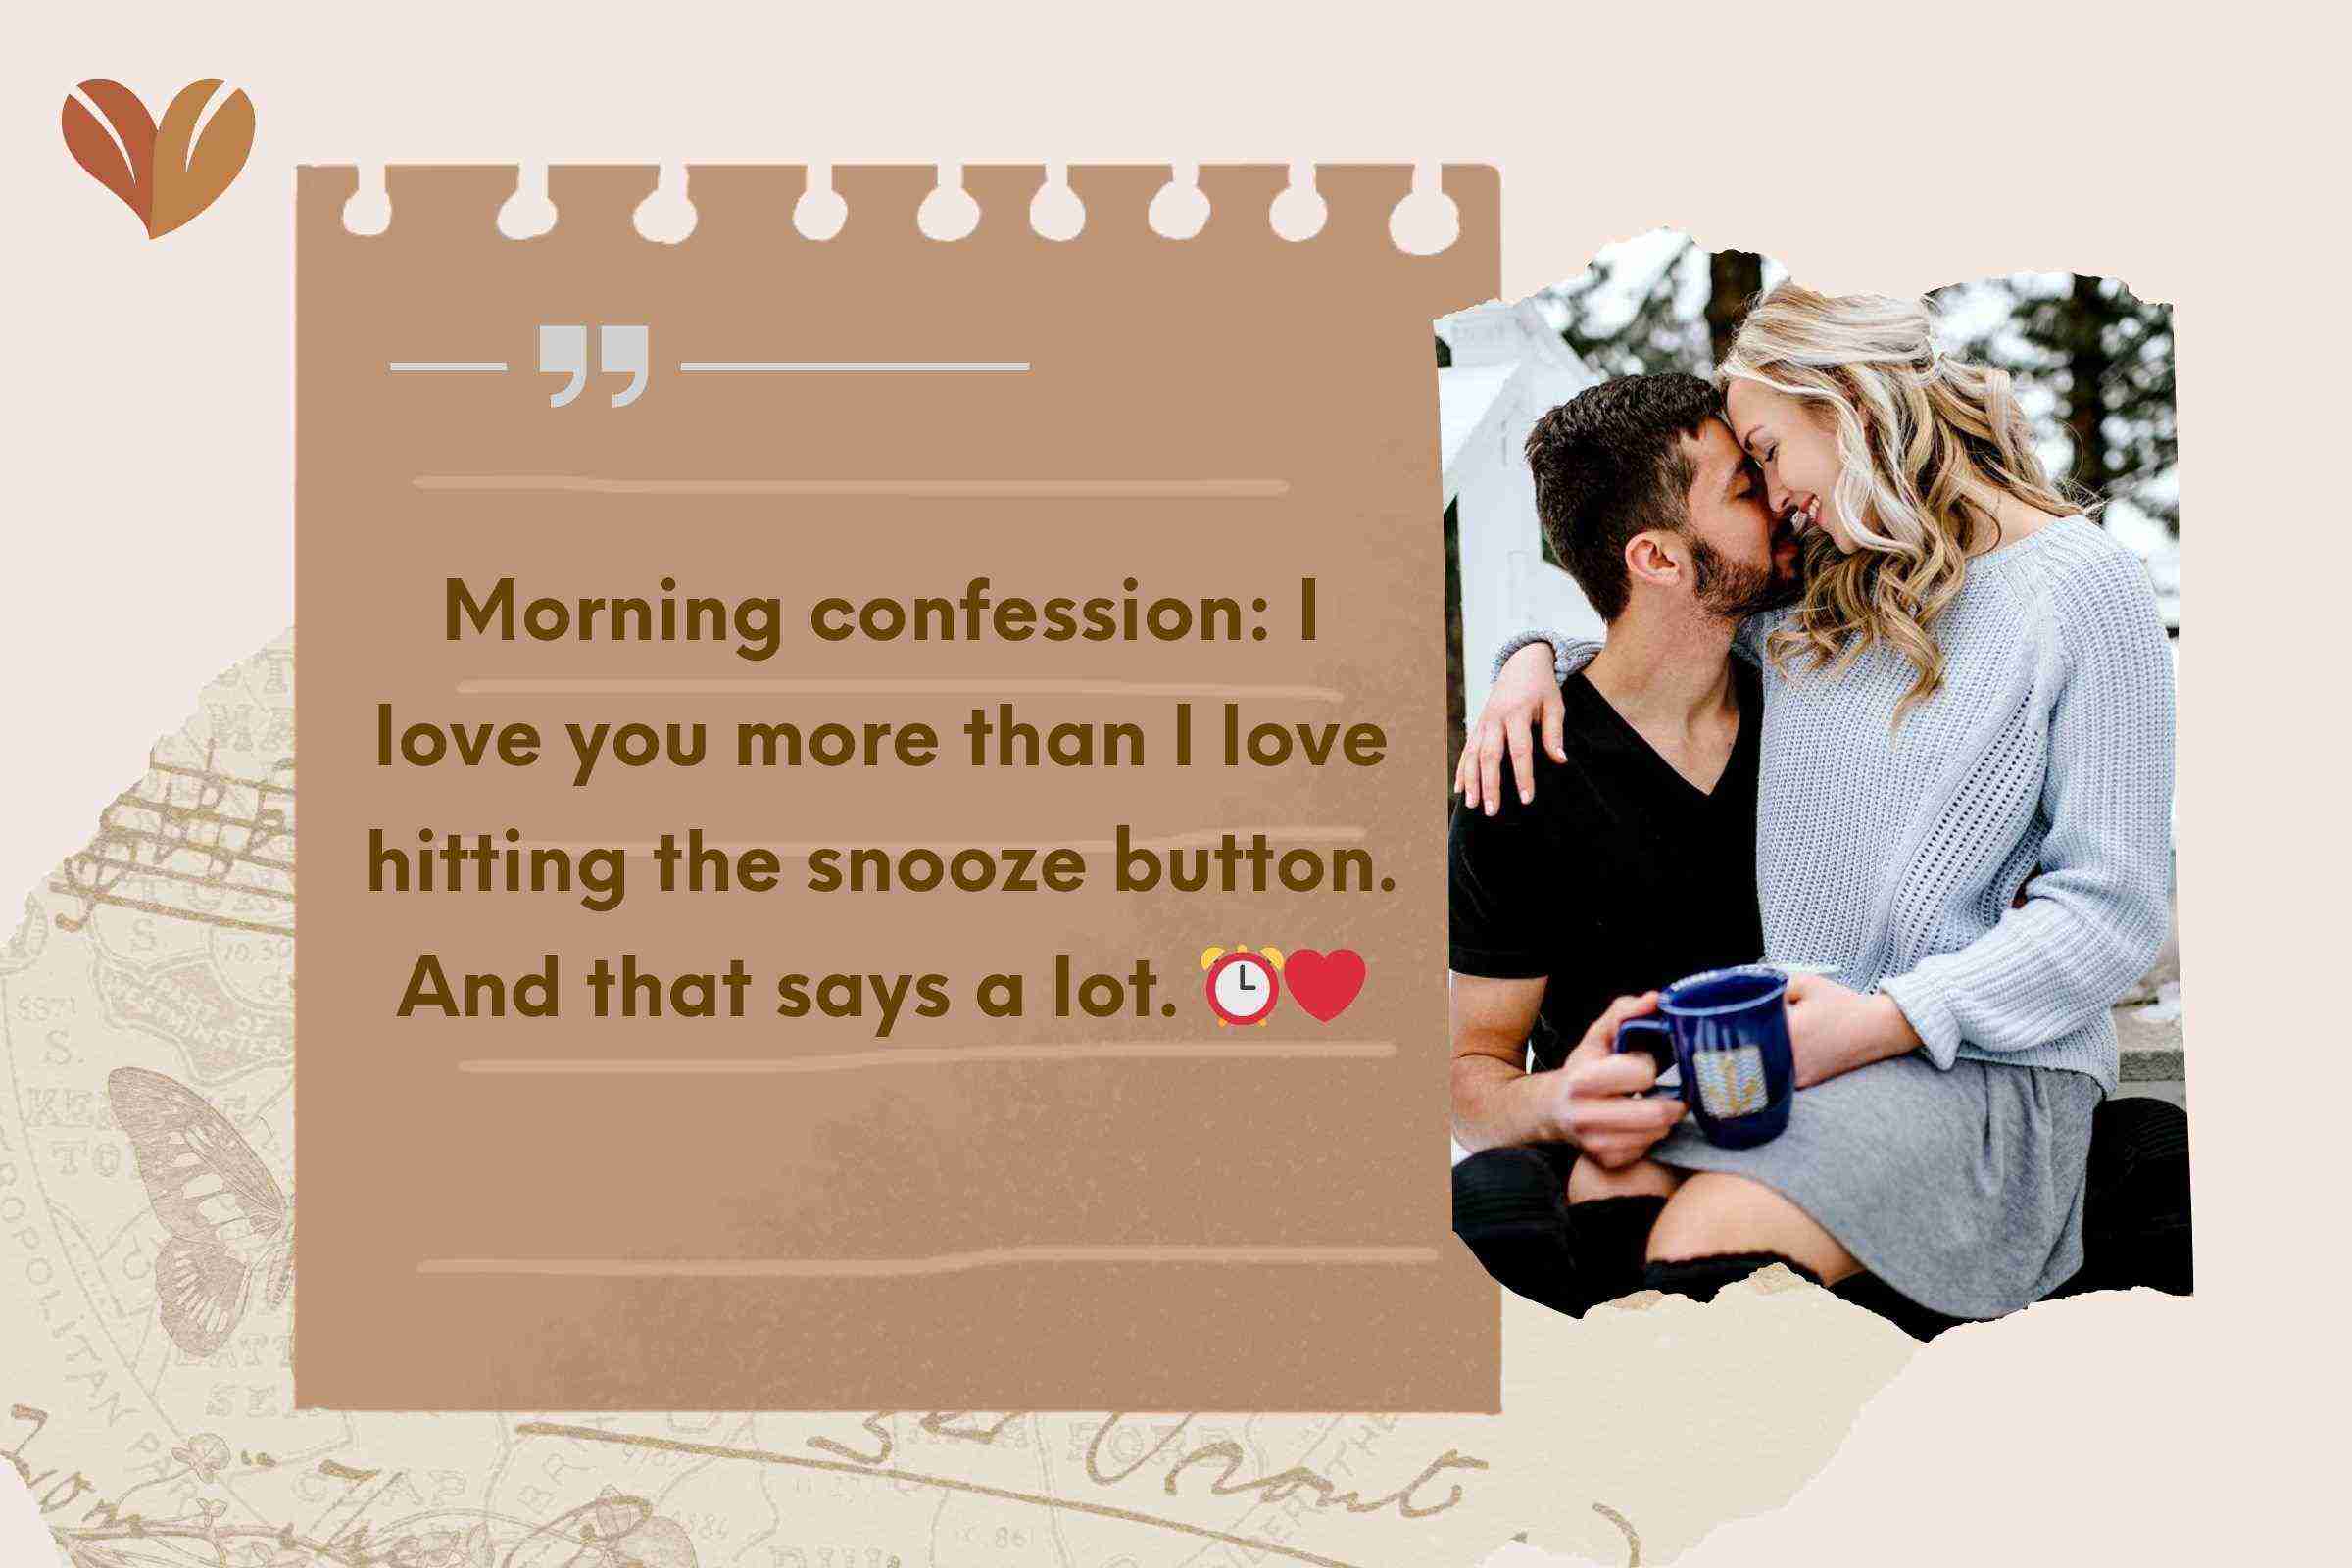 Morning confession: I love you more than I love hitting the snooze button. And that says a lot. ⏰❤️